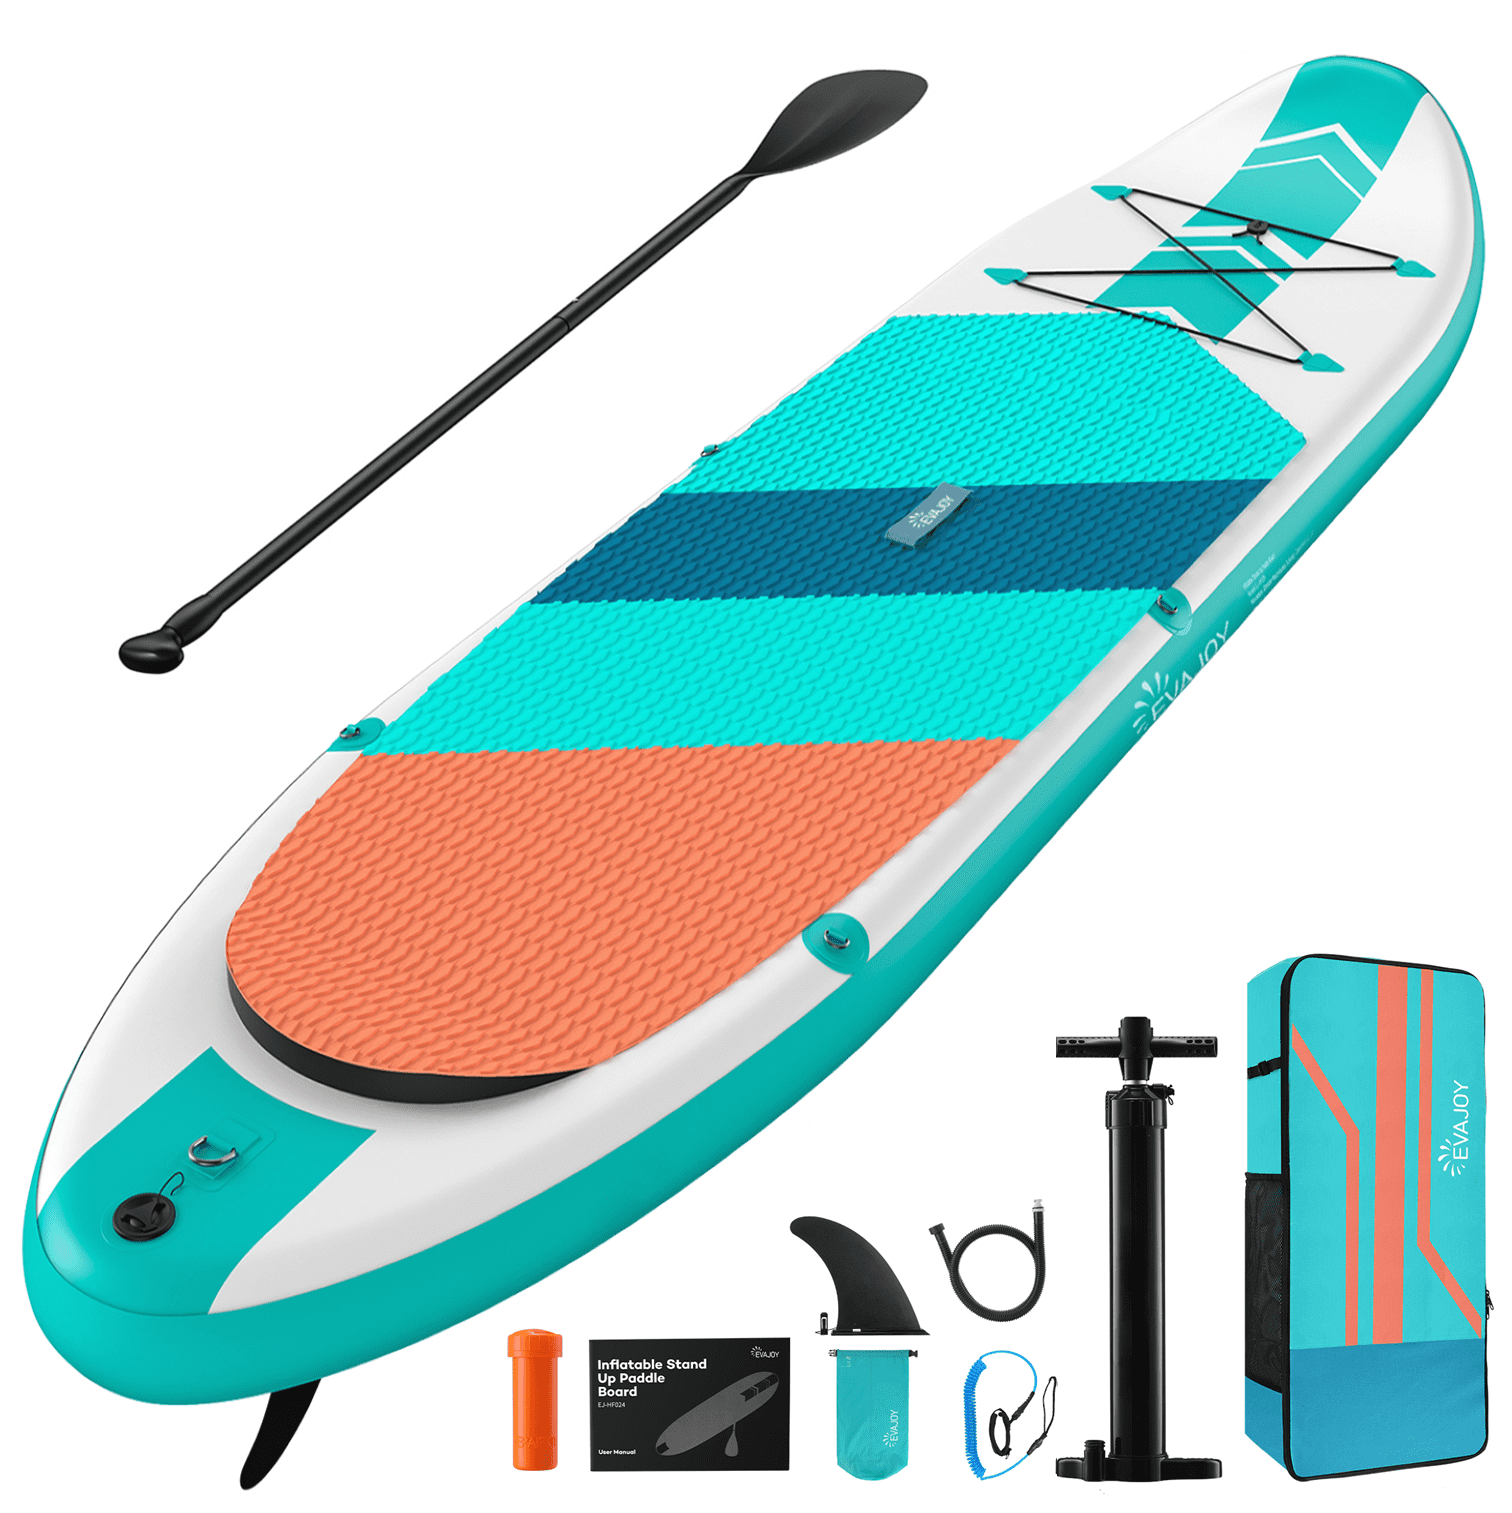 Imaginativo No haga variable 10.8 ft. Inflatable Stand Up Paddle Board, All Round iSUP Paddleboarding,  with Pump & Accessories Pack - Walmart.com